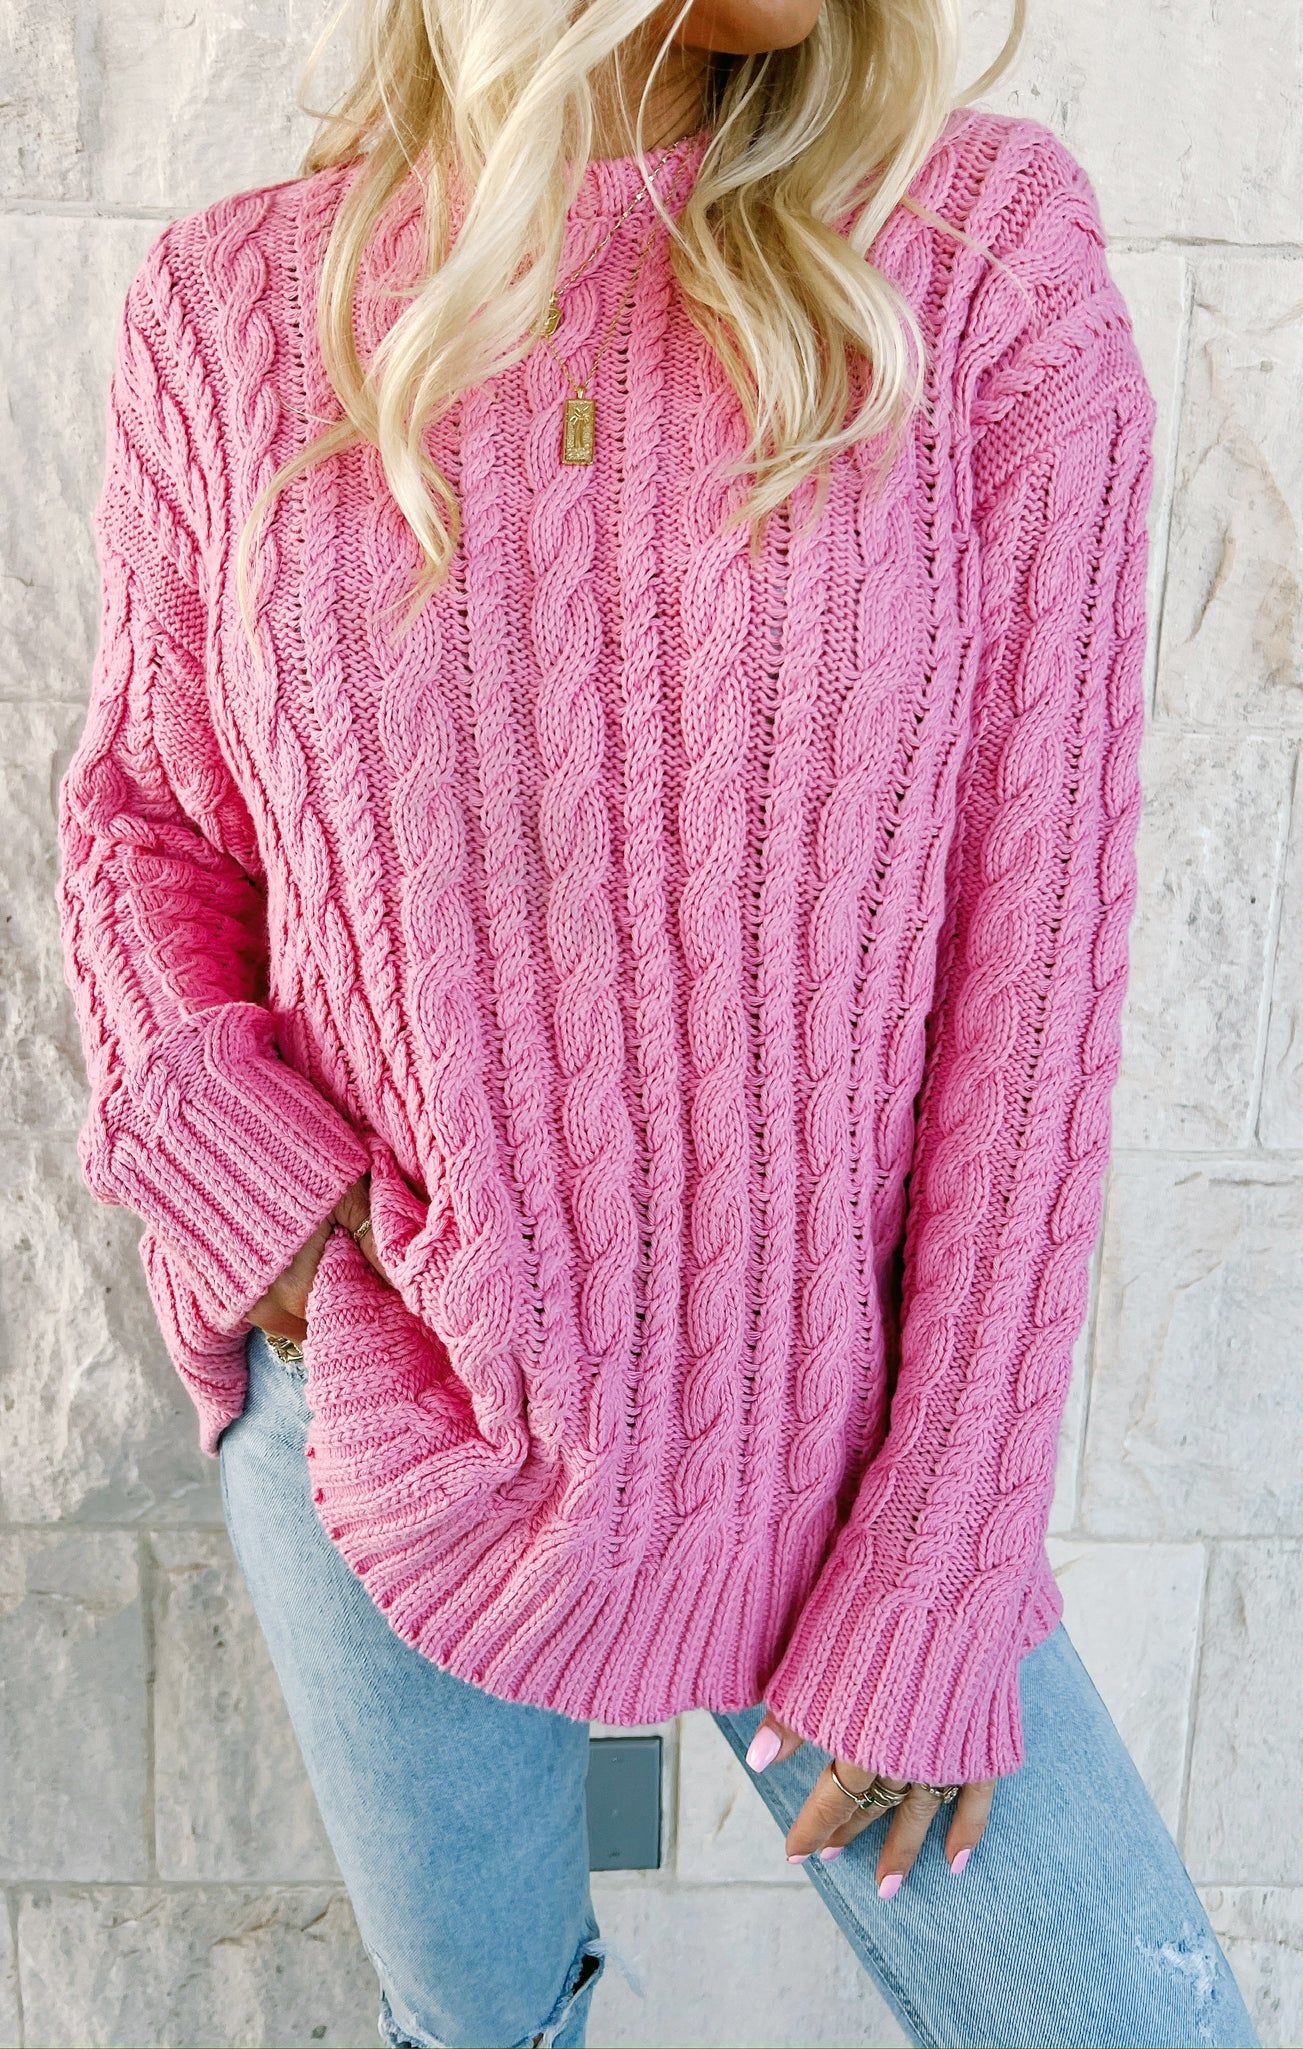 Day to Day Sweater | Show Me Your Mumu